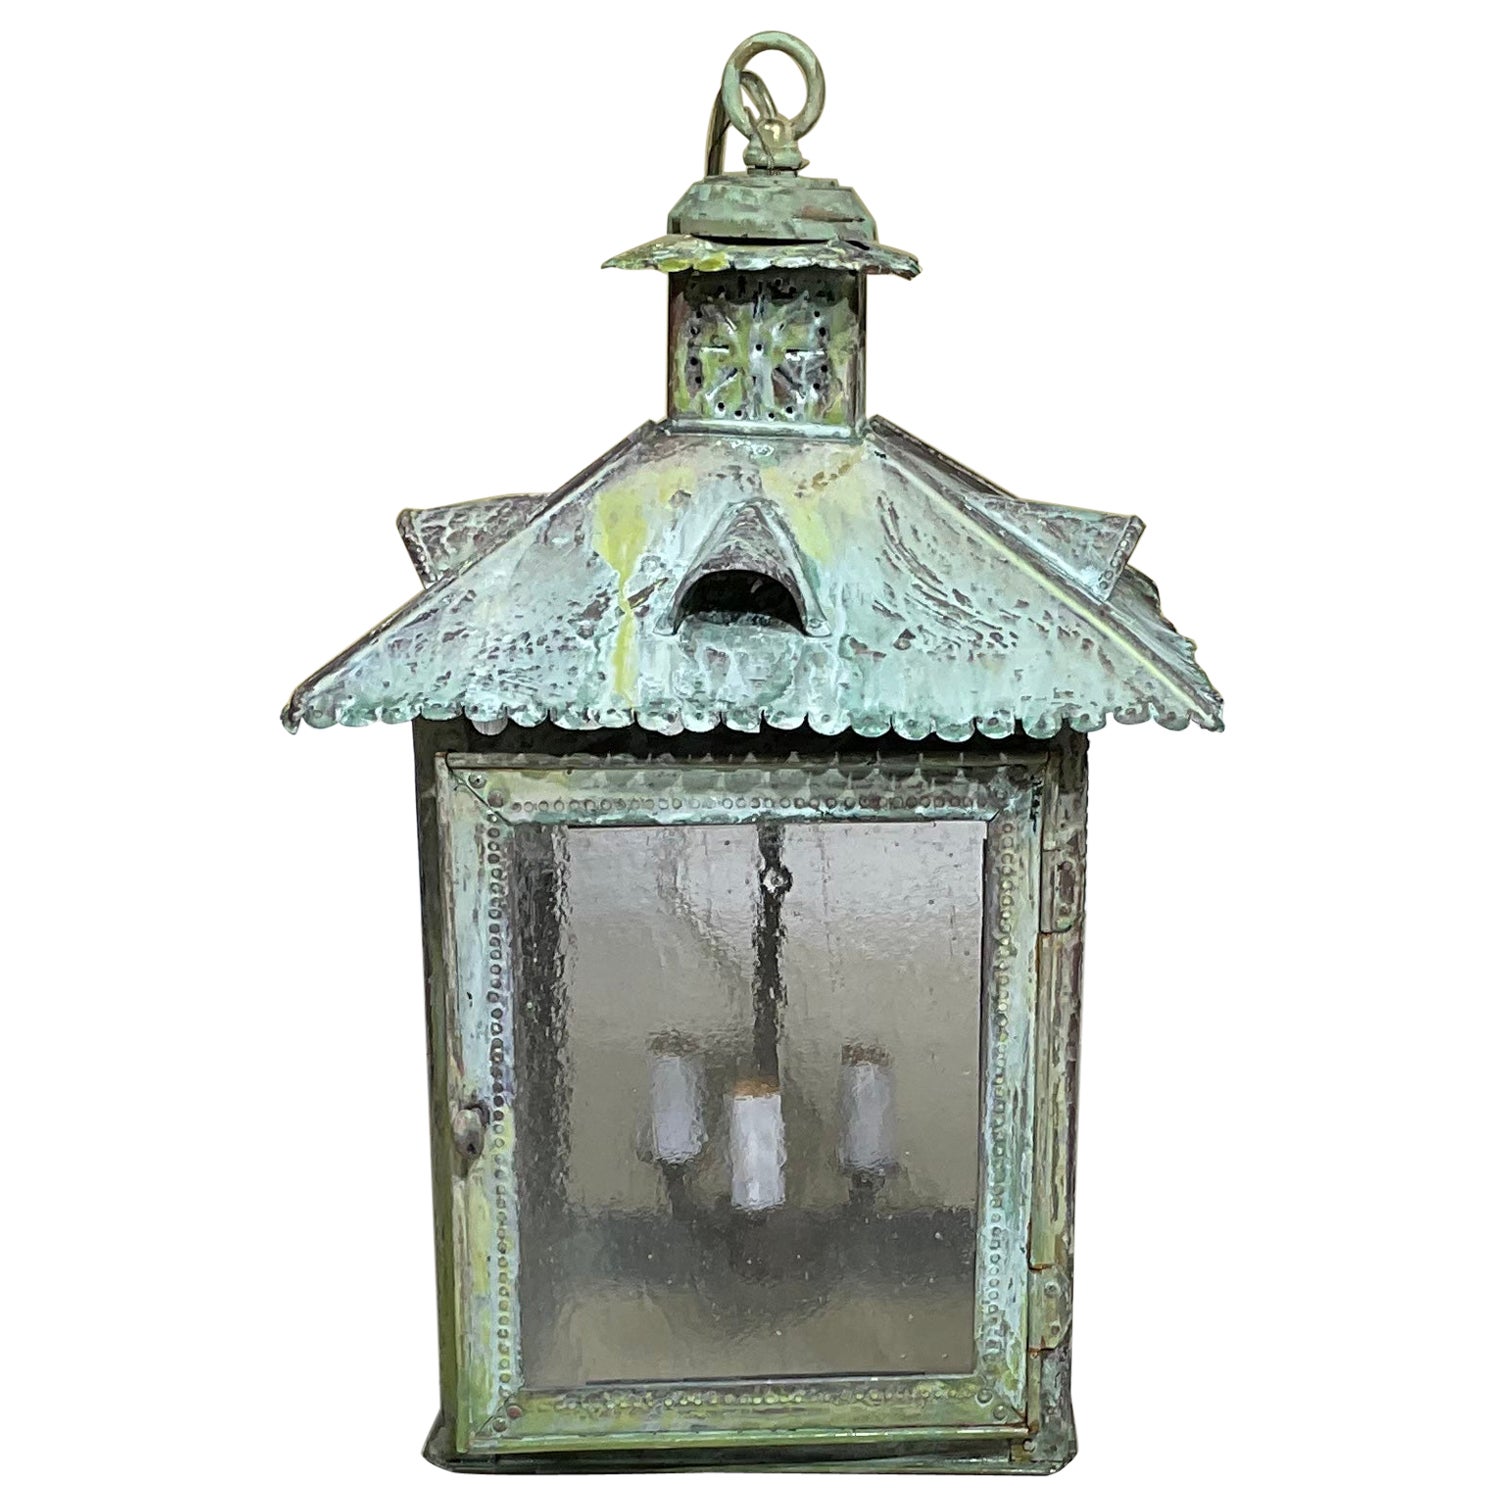 One of a Kind Antique Hanging Copper Lantern